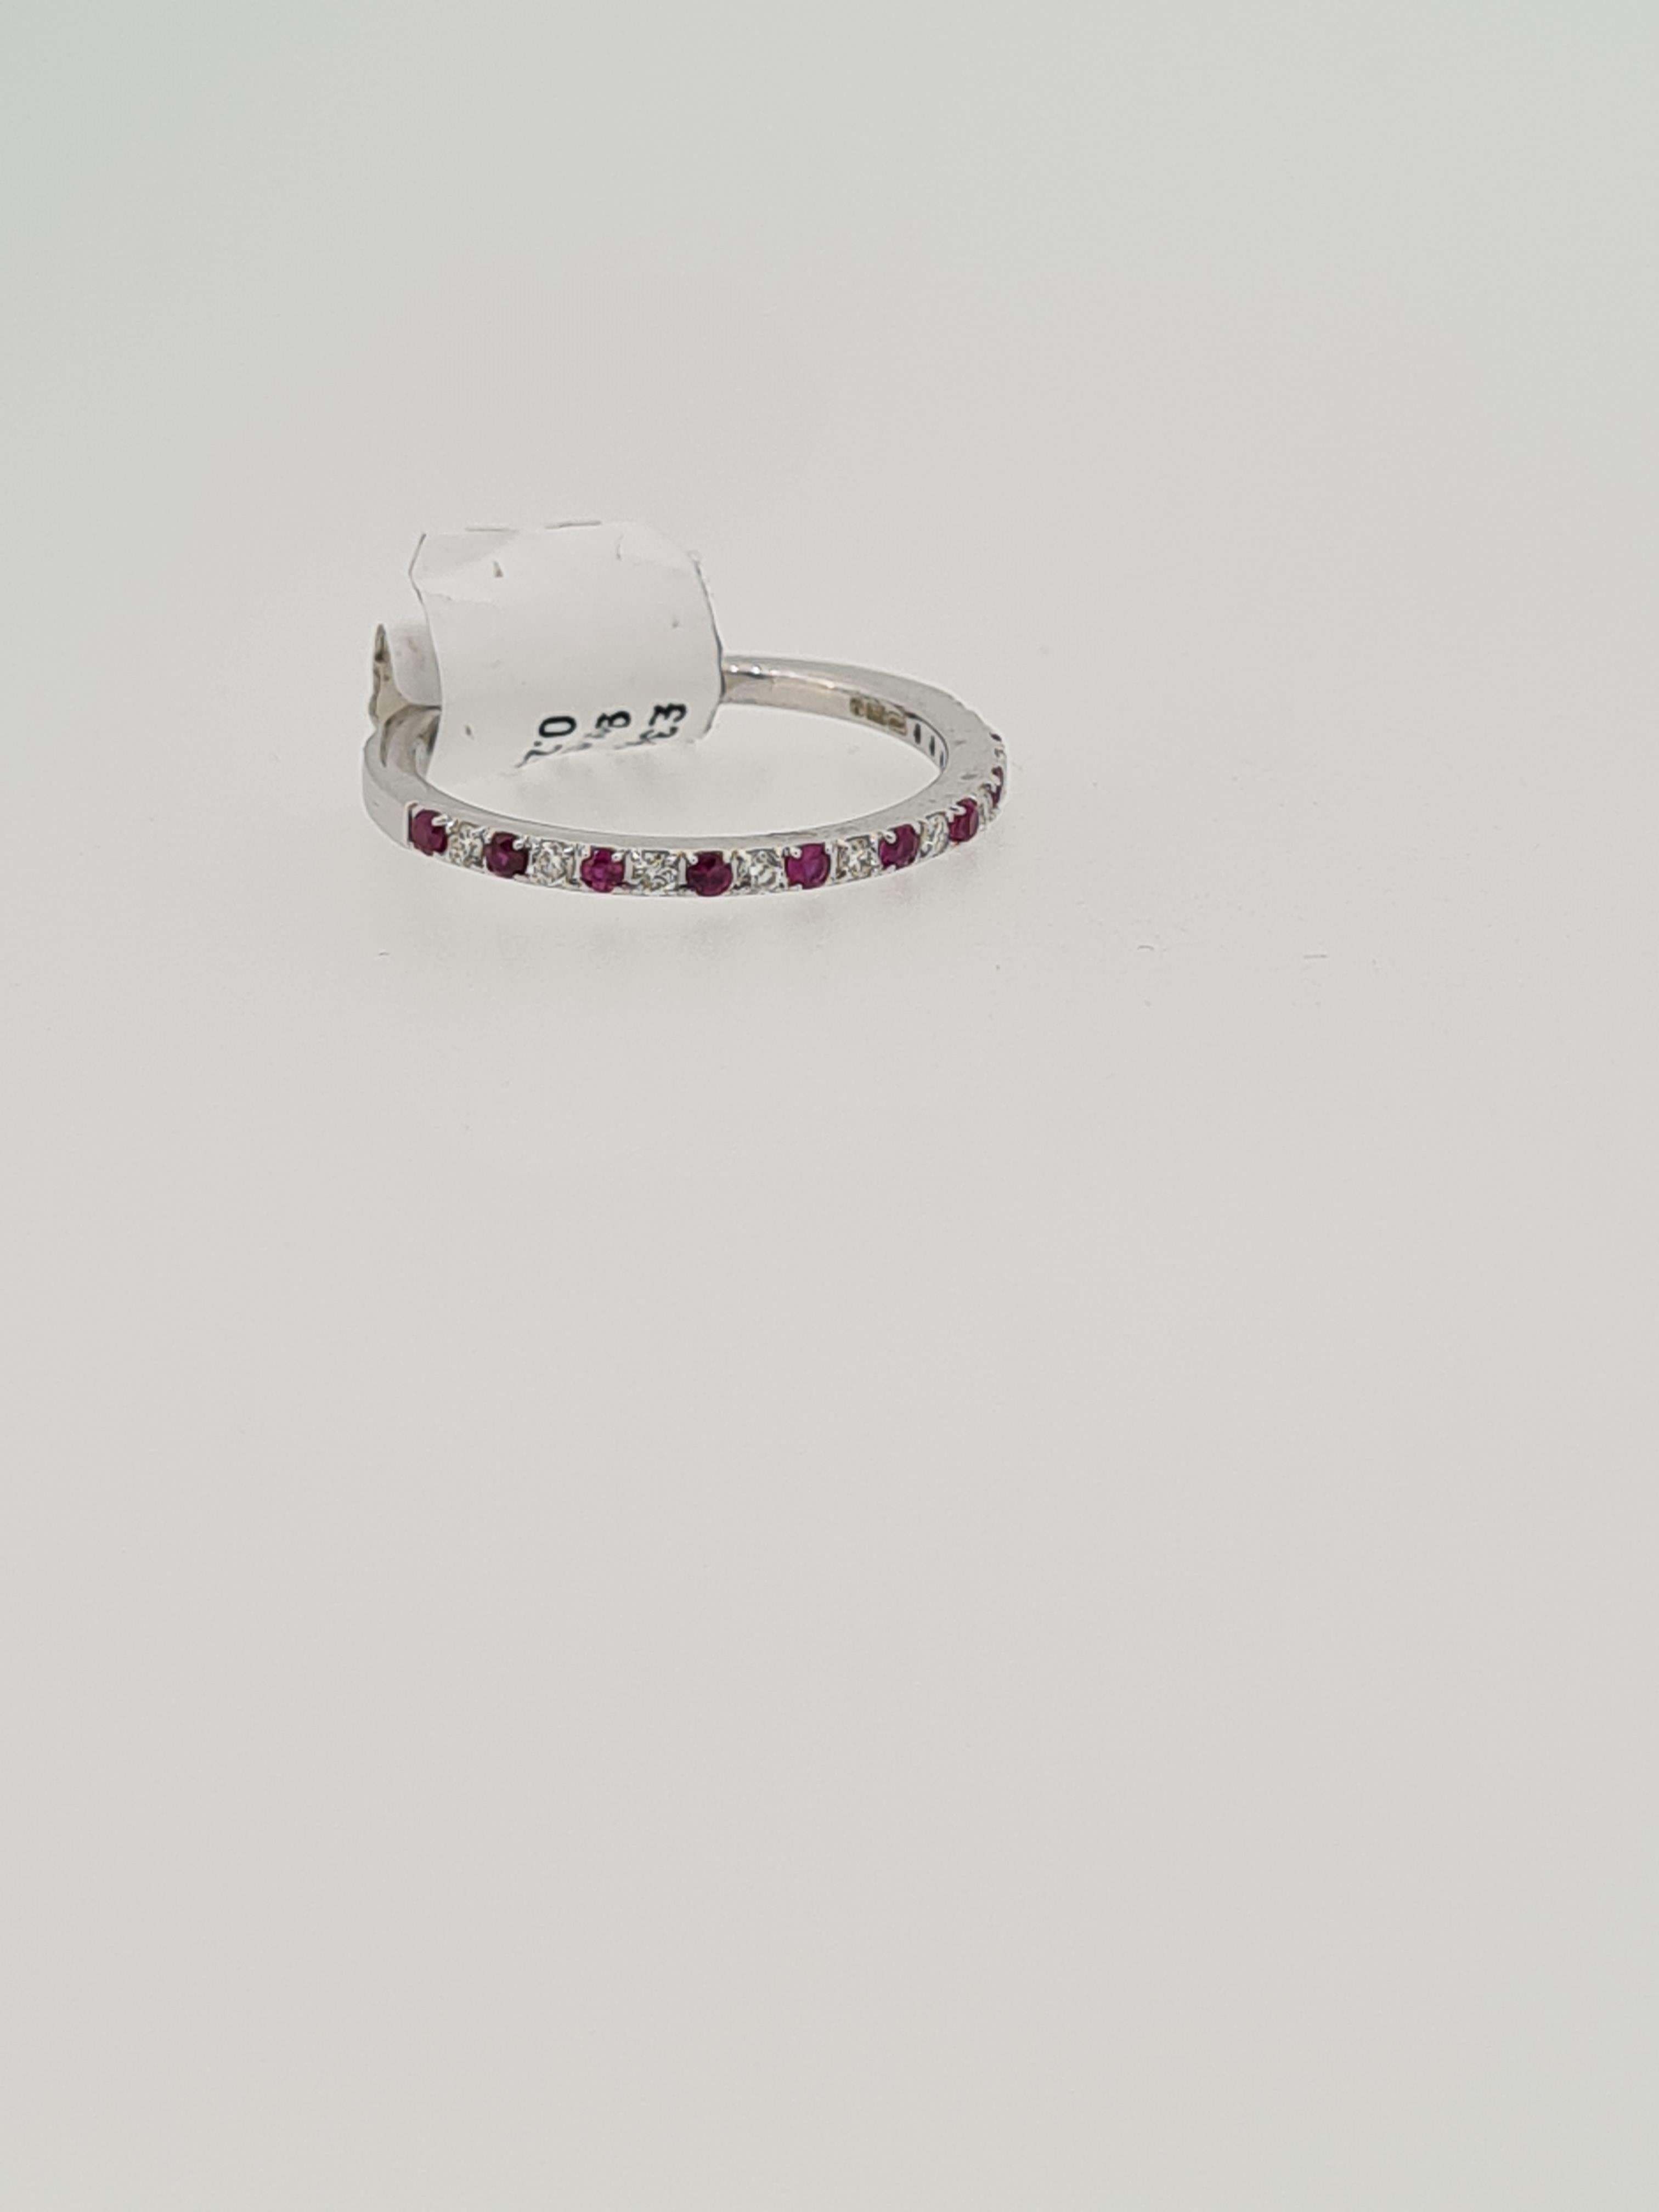 9ct whtie gold ruby and diamond eternity ring - Image 5 of 5